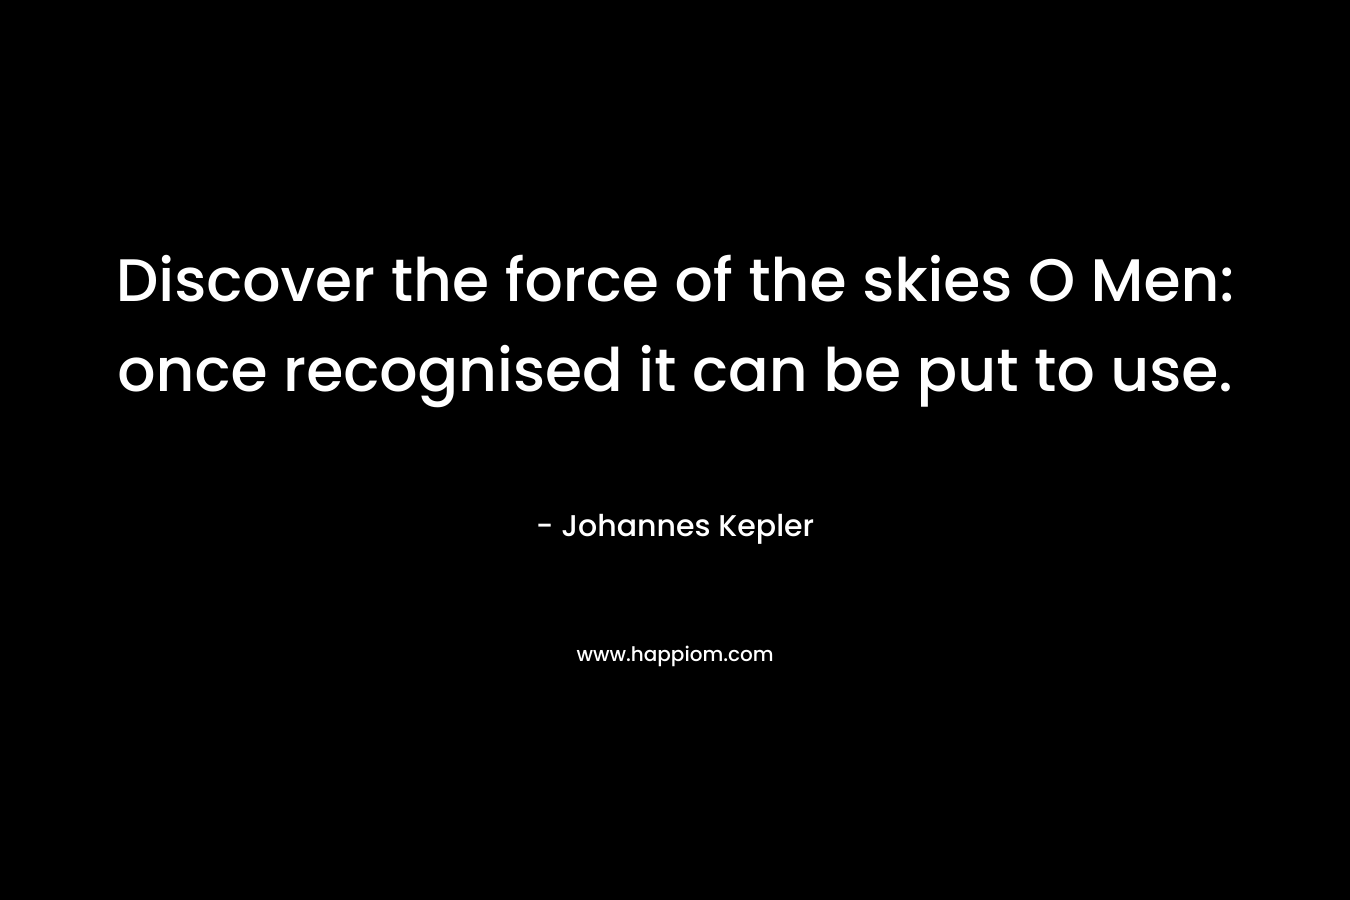 Discover the force of the skies O Men: once recognised it can be put to use.